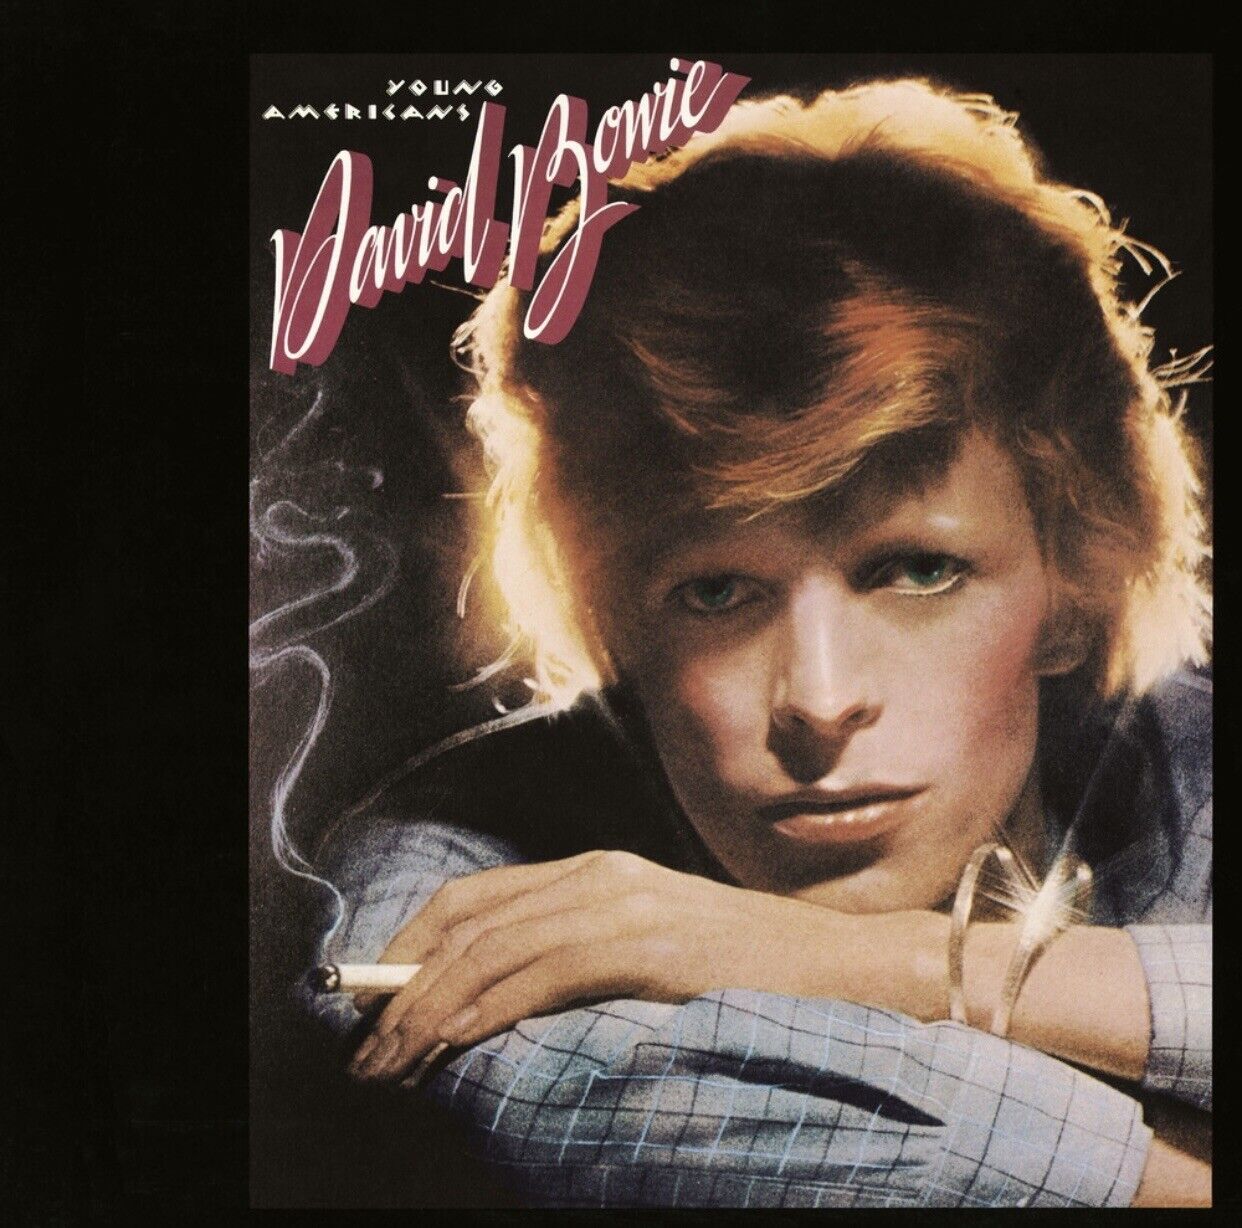 David Bowie Young Americans album cover canvas wall art